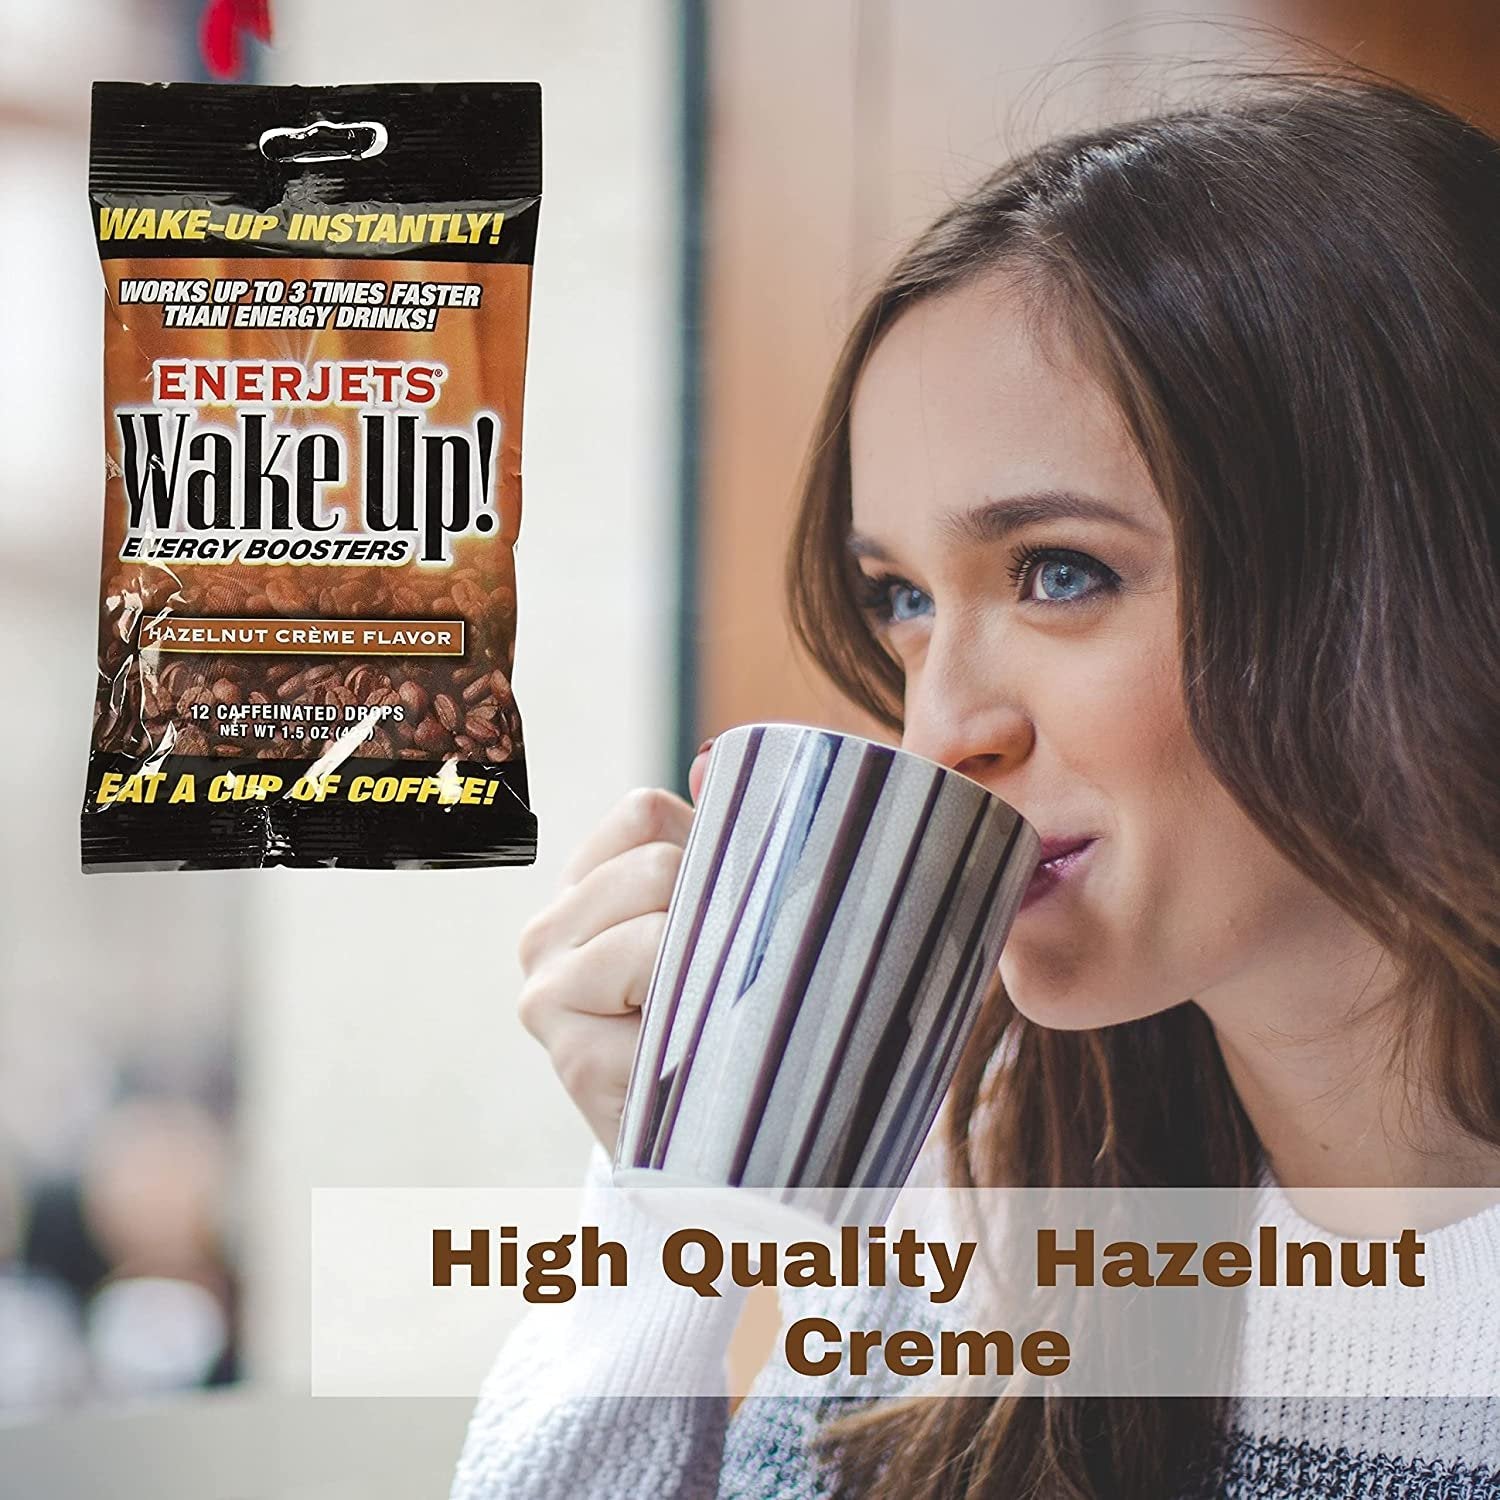 Enerjets Wake Up Energy Booster Caffeinated Drops - Instant Coffee Energy Supplements - Hazelnut Creme Flavor - Pack of 6, 12 Drops Per Package with Worldwide Nutrition Multi Purpose Key Chain